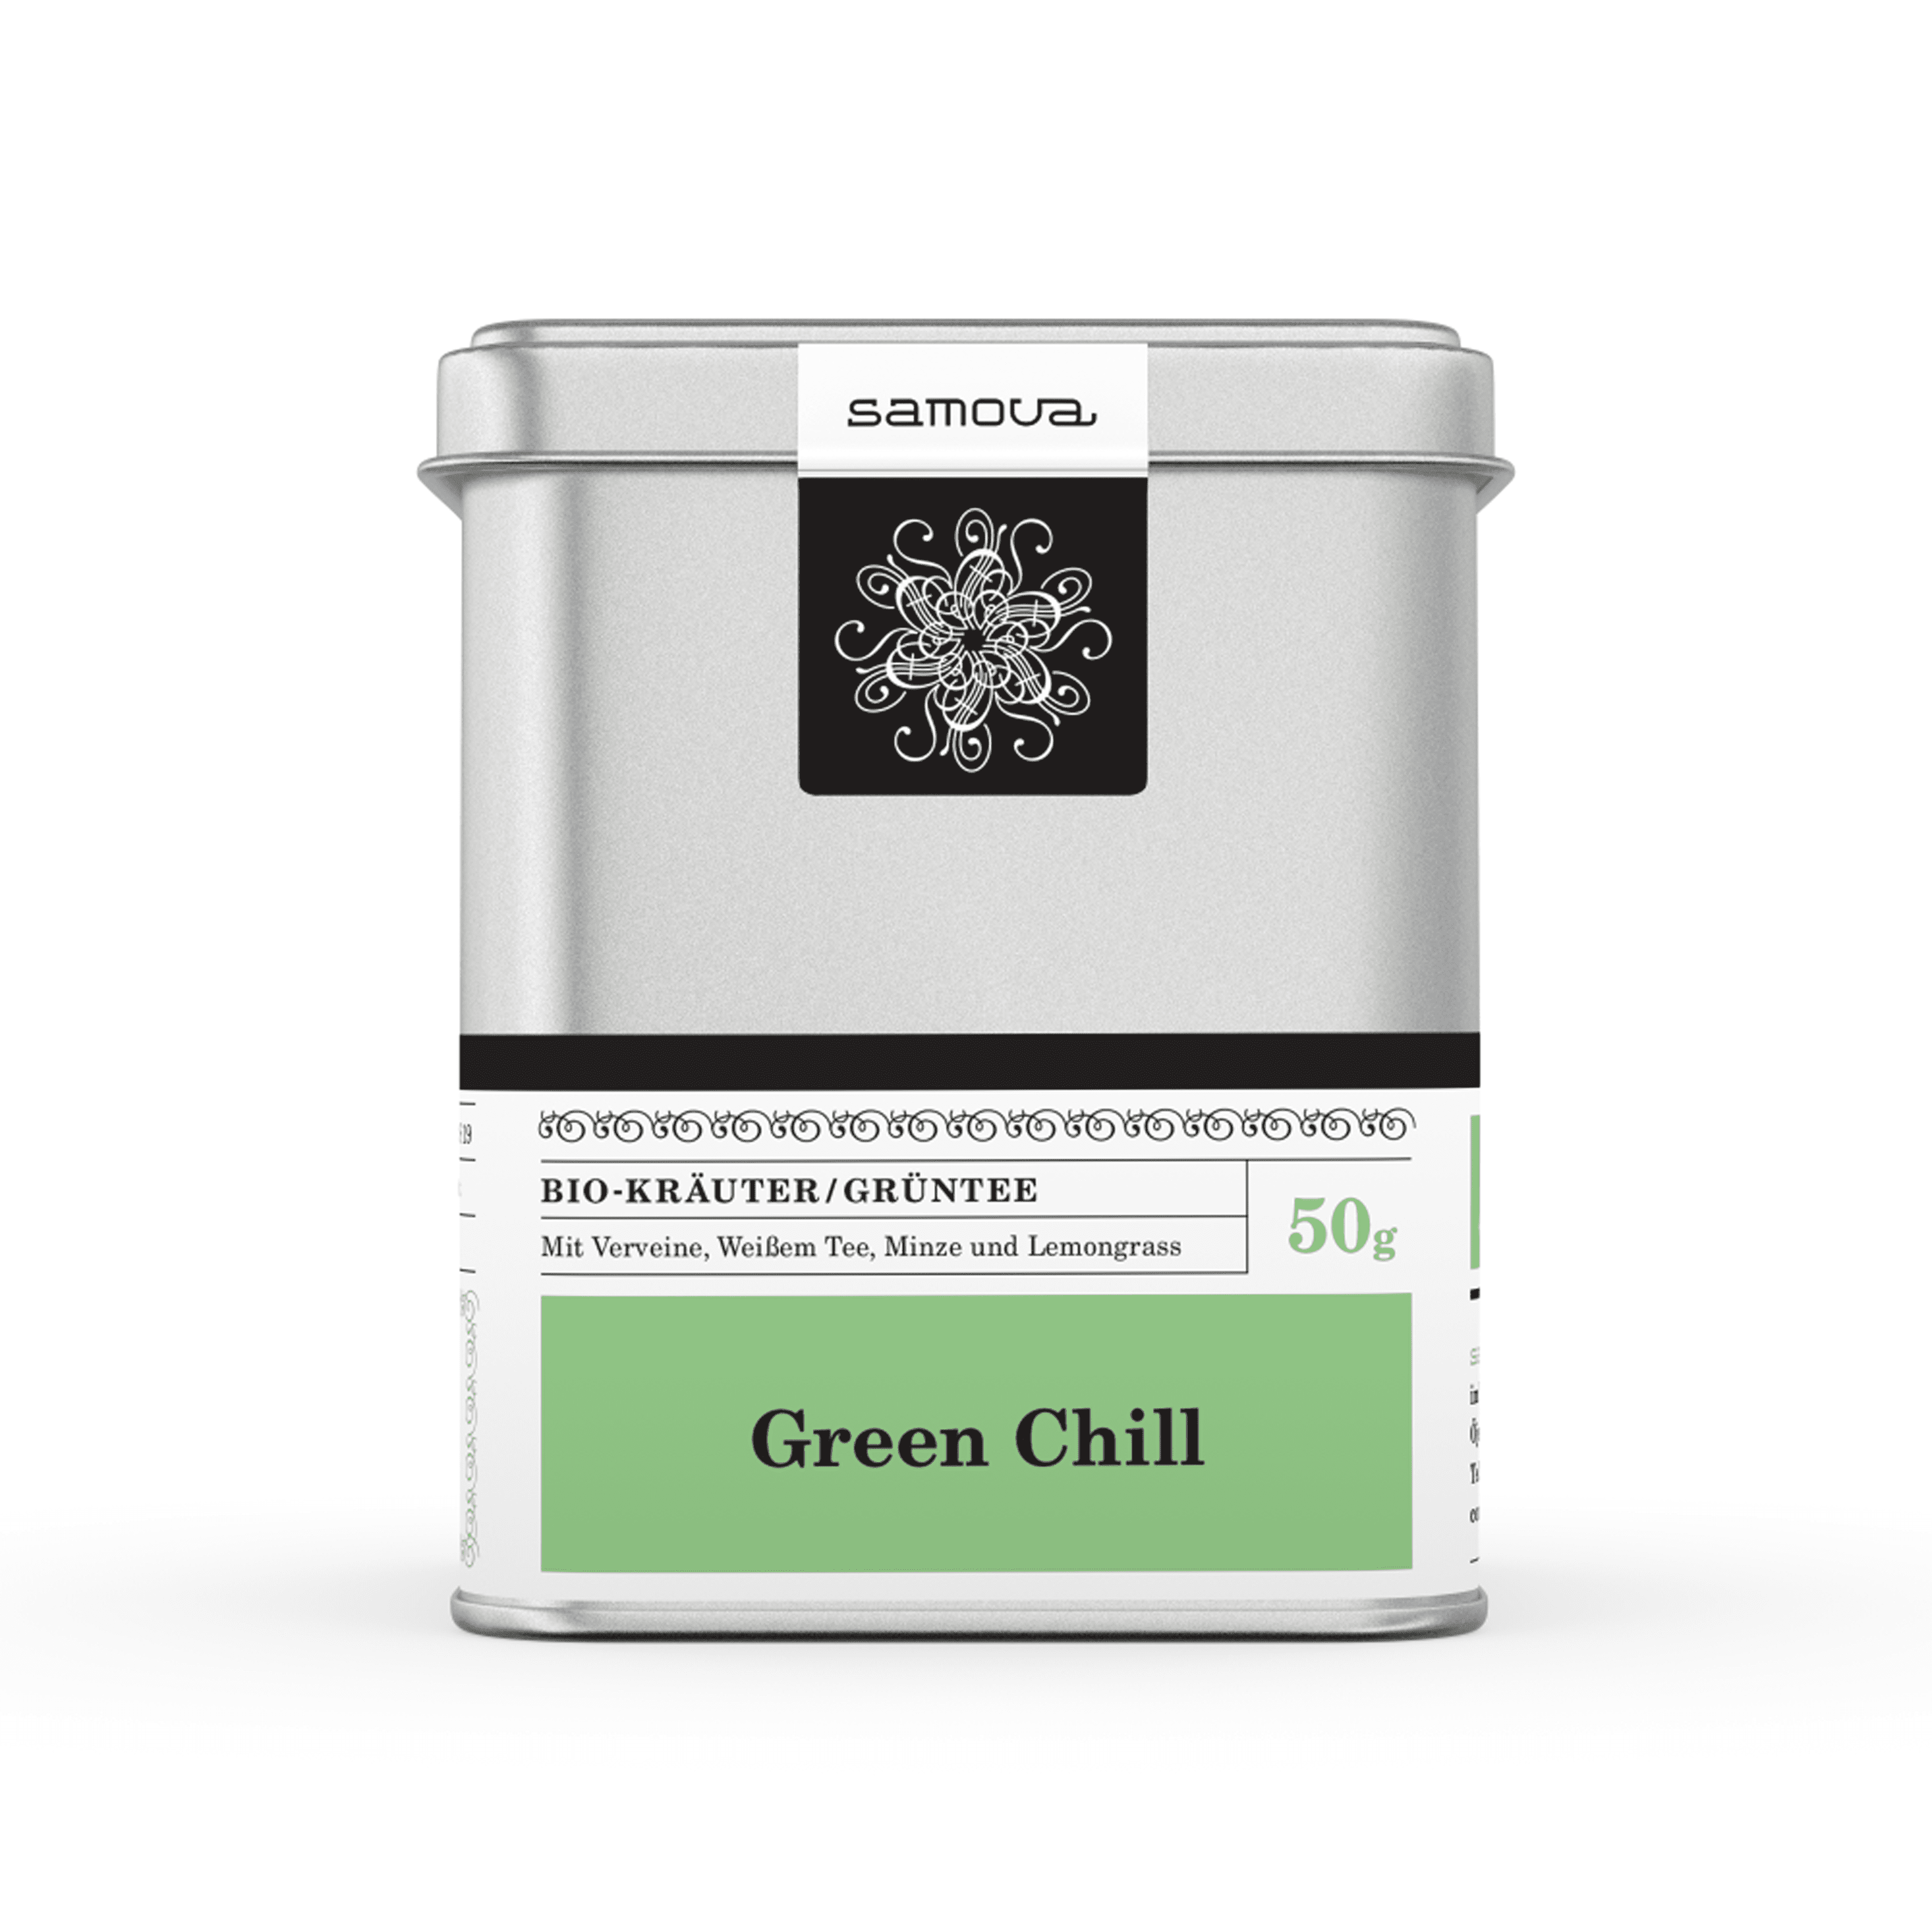 Can of Green Chill tea